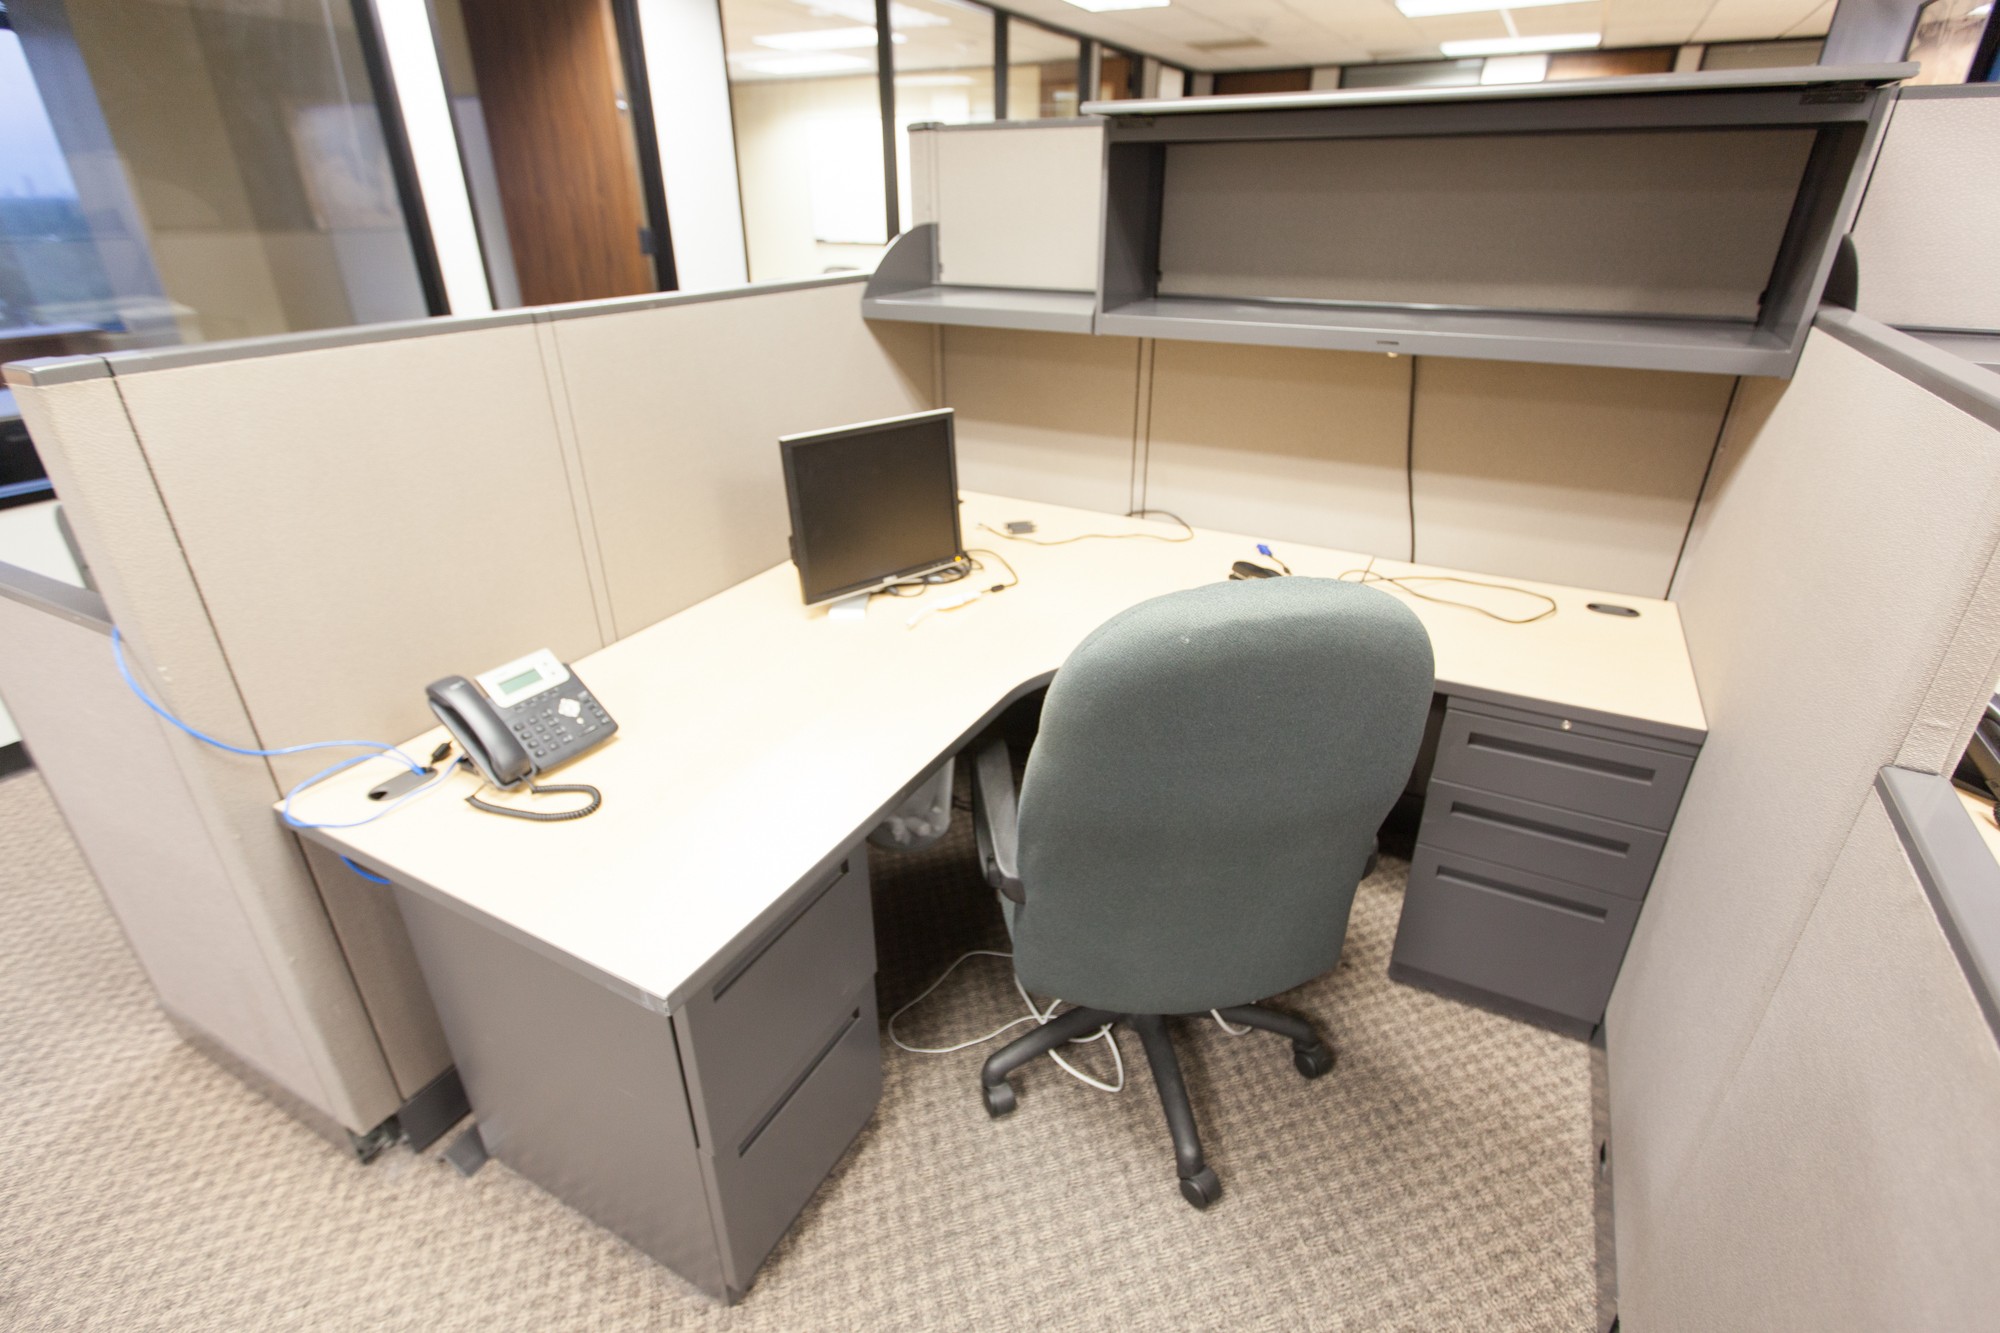 Steelcase Cubicles for Offices-1200